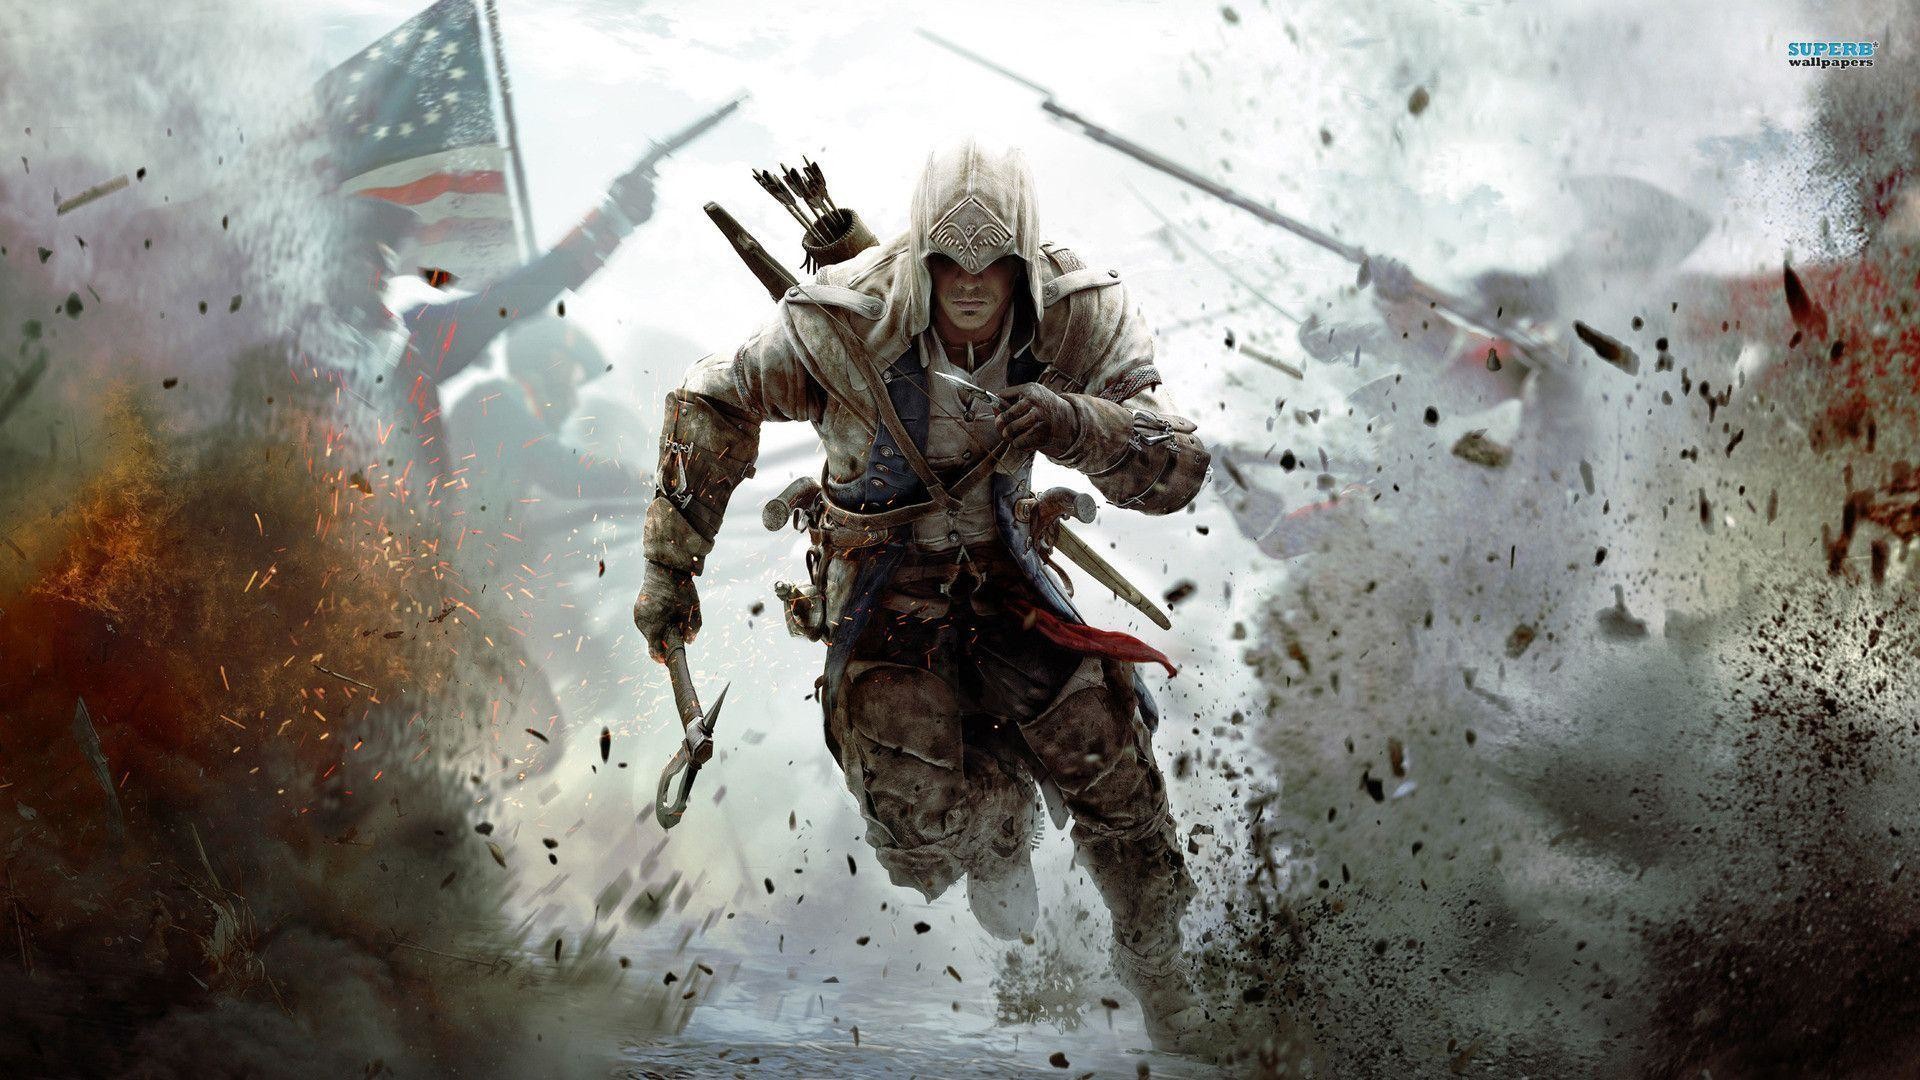 1920x1080 Assassin's Creed III wallpaper - Game wallpapers - #